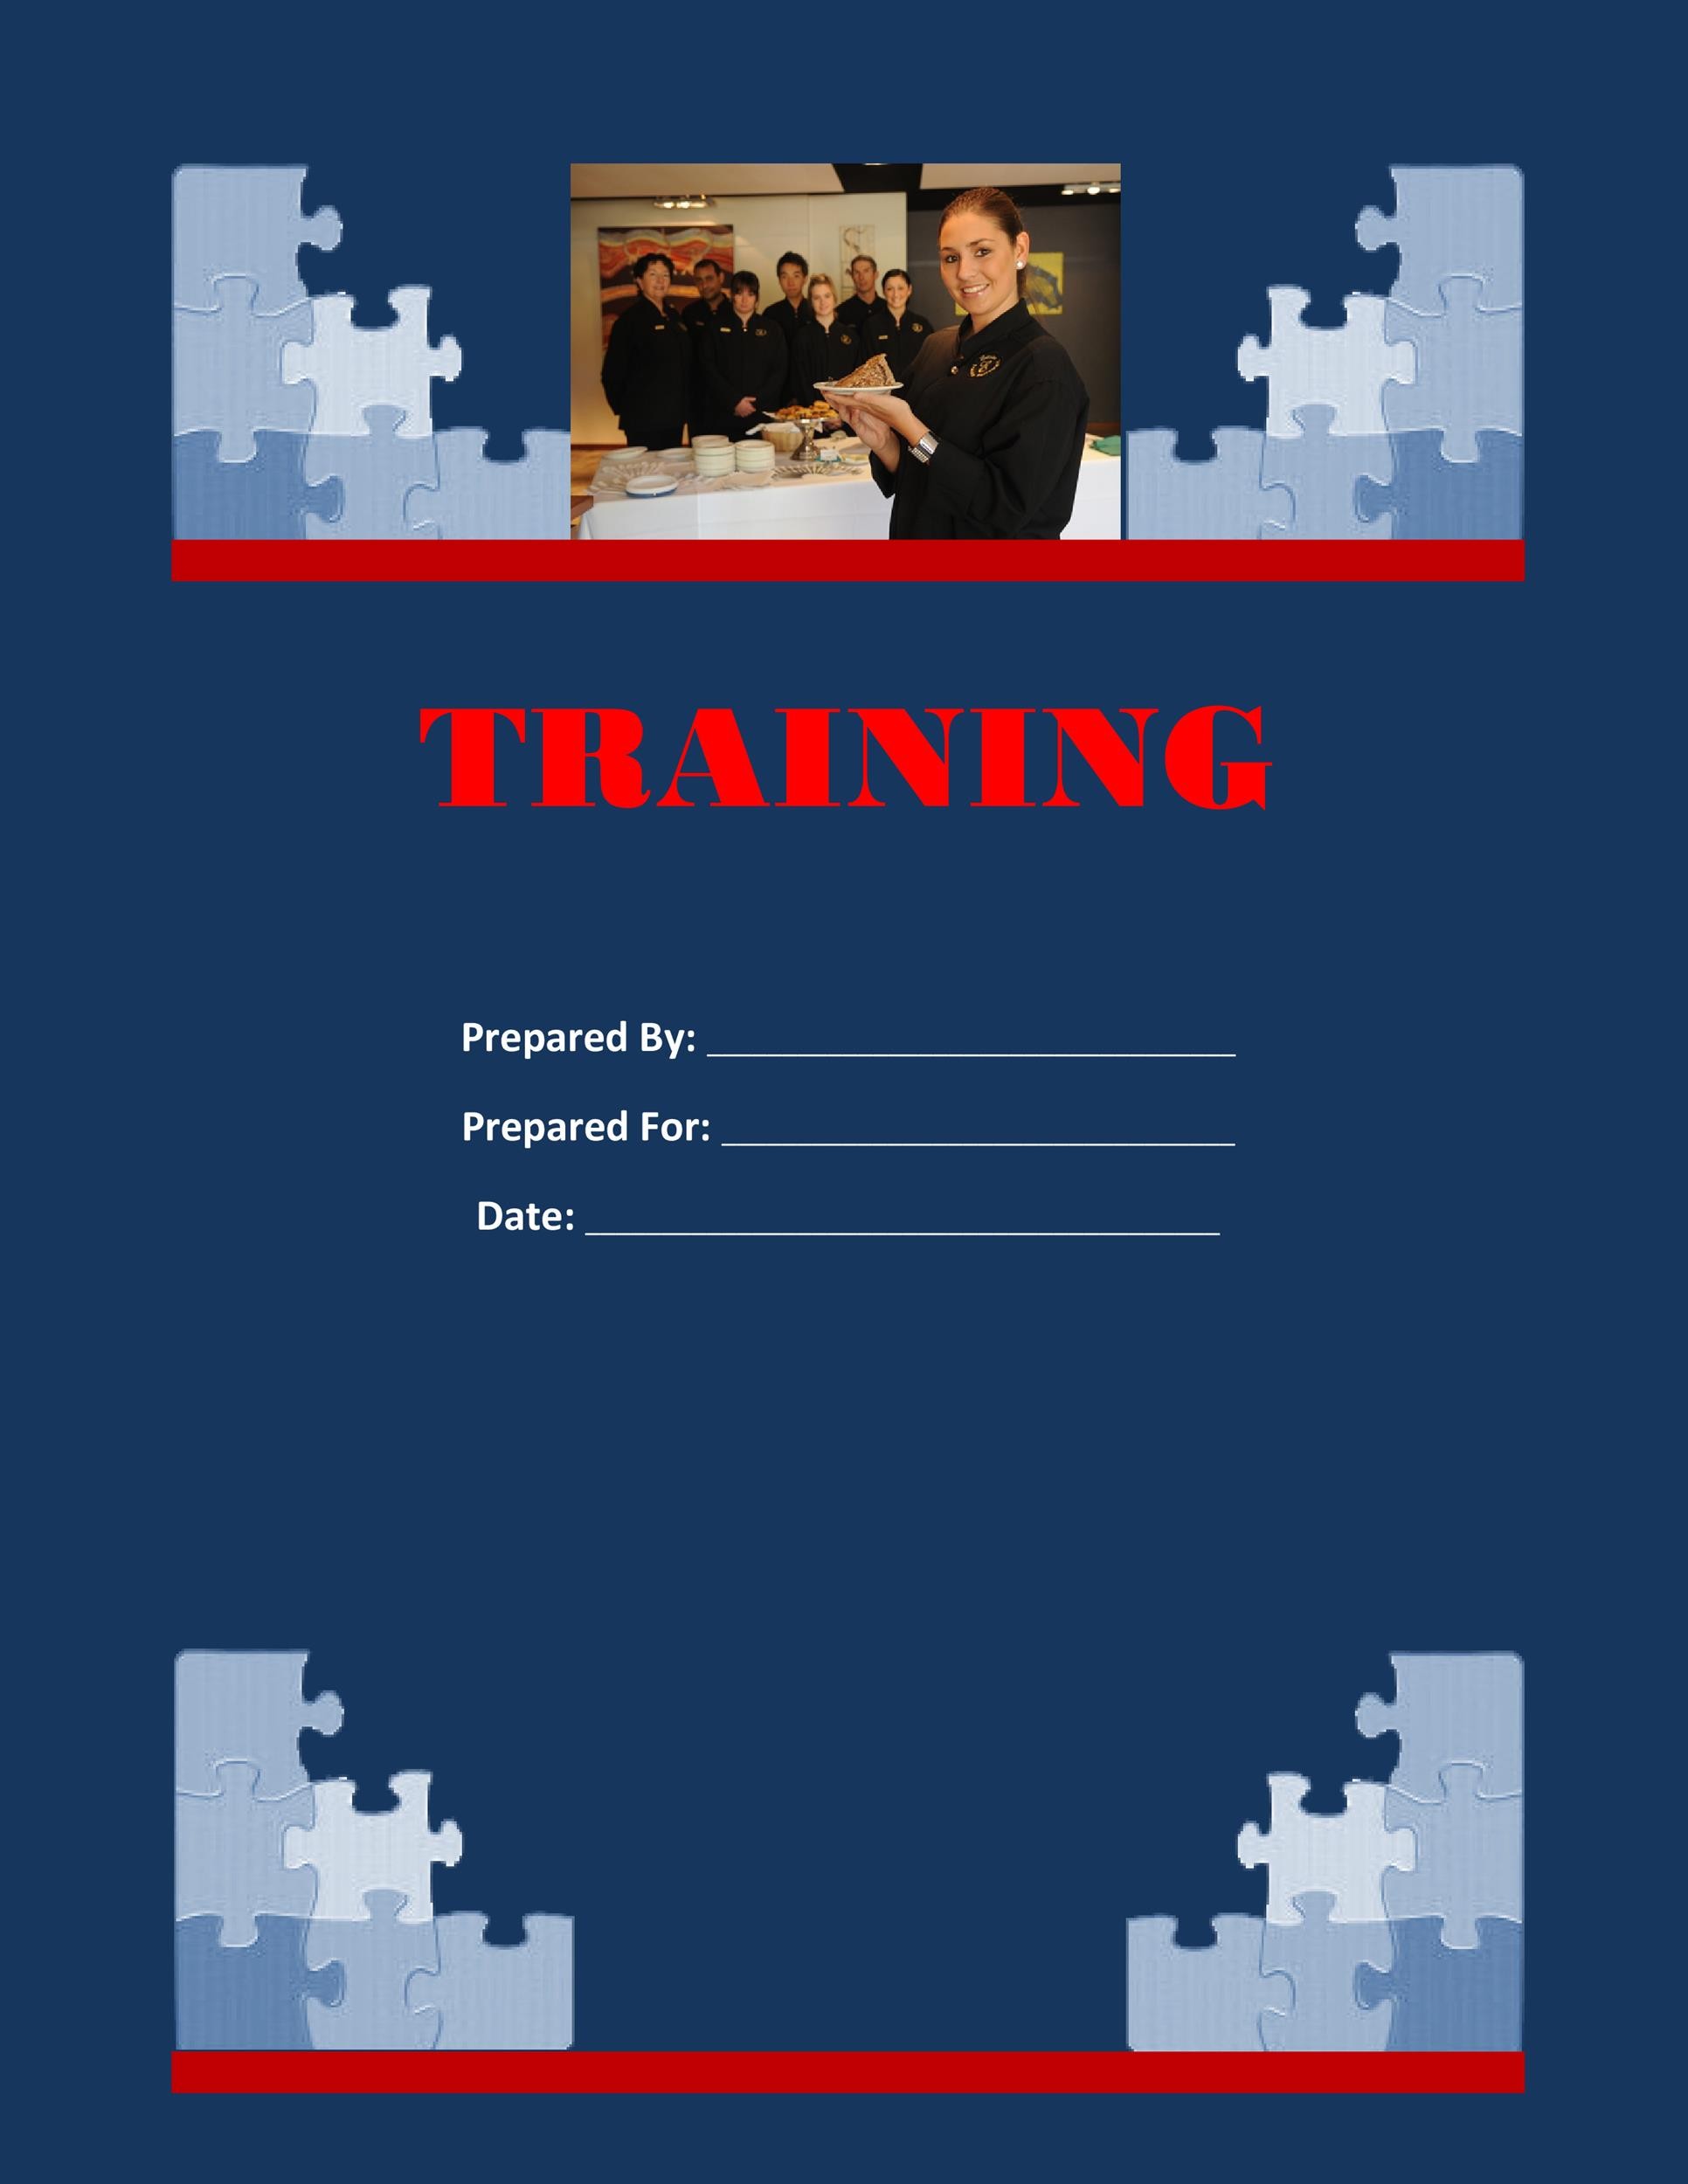 Training Manual 40 Free Templates Examples In MS Word